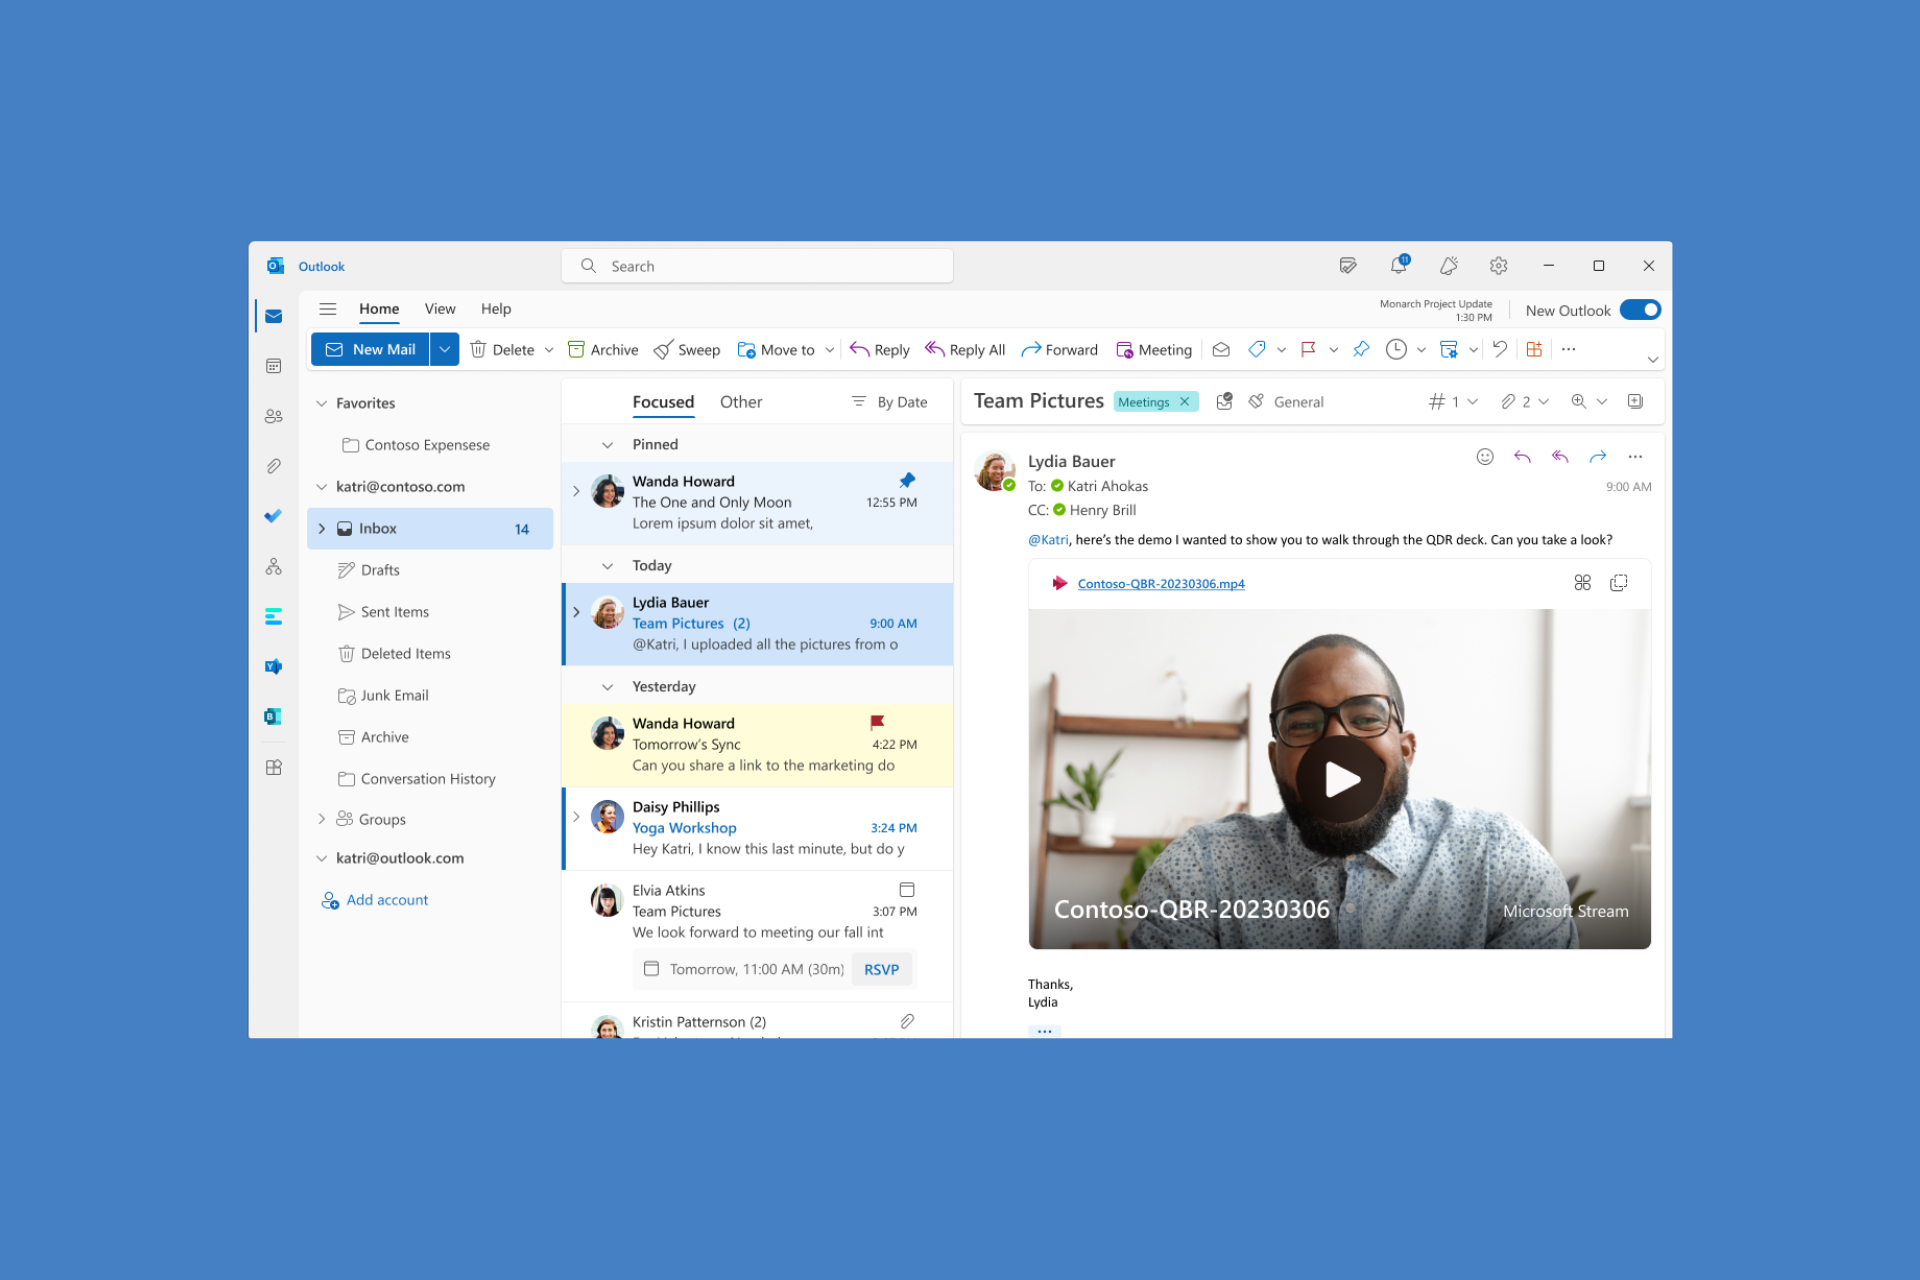 Now share Microsoft Stream videos directly into emails on Outlook